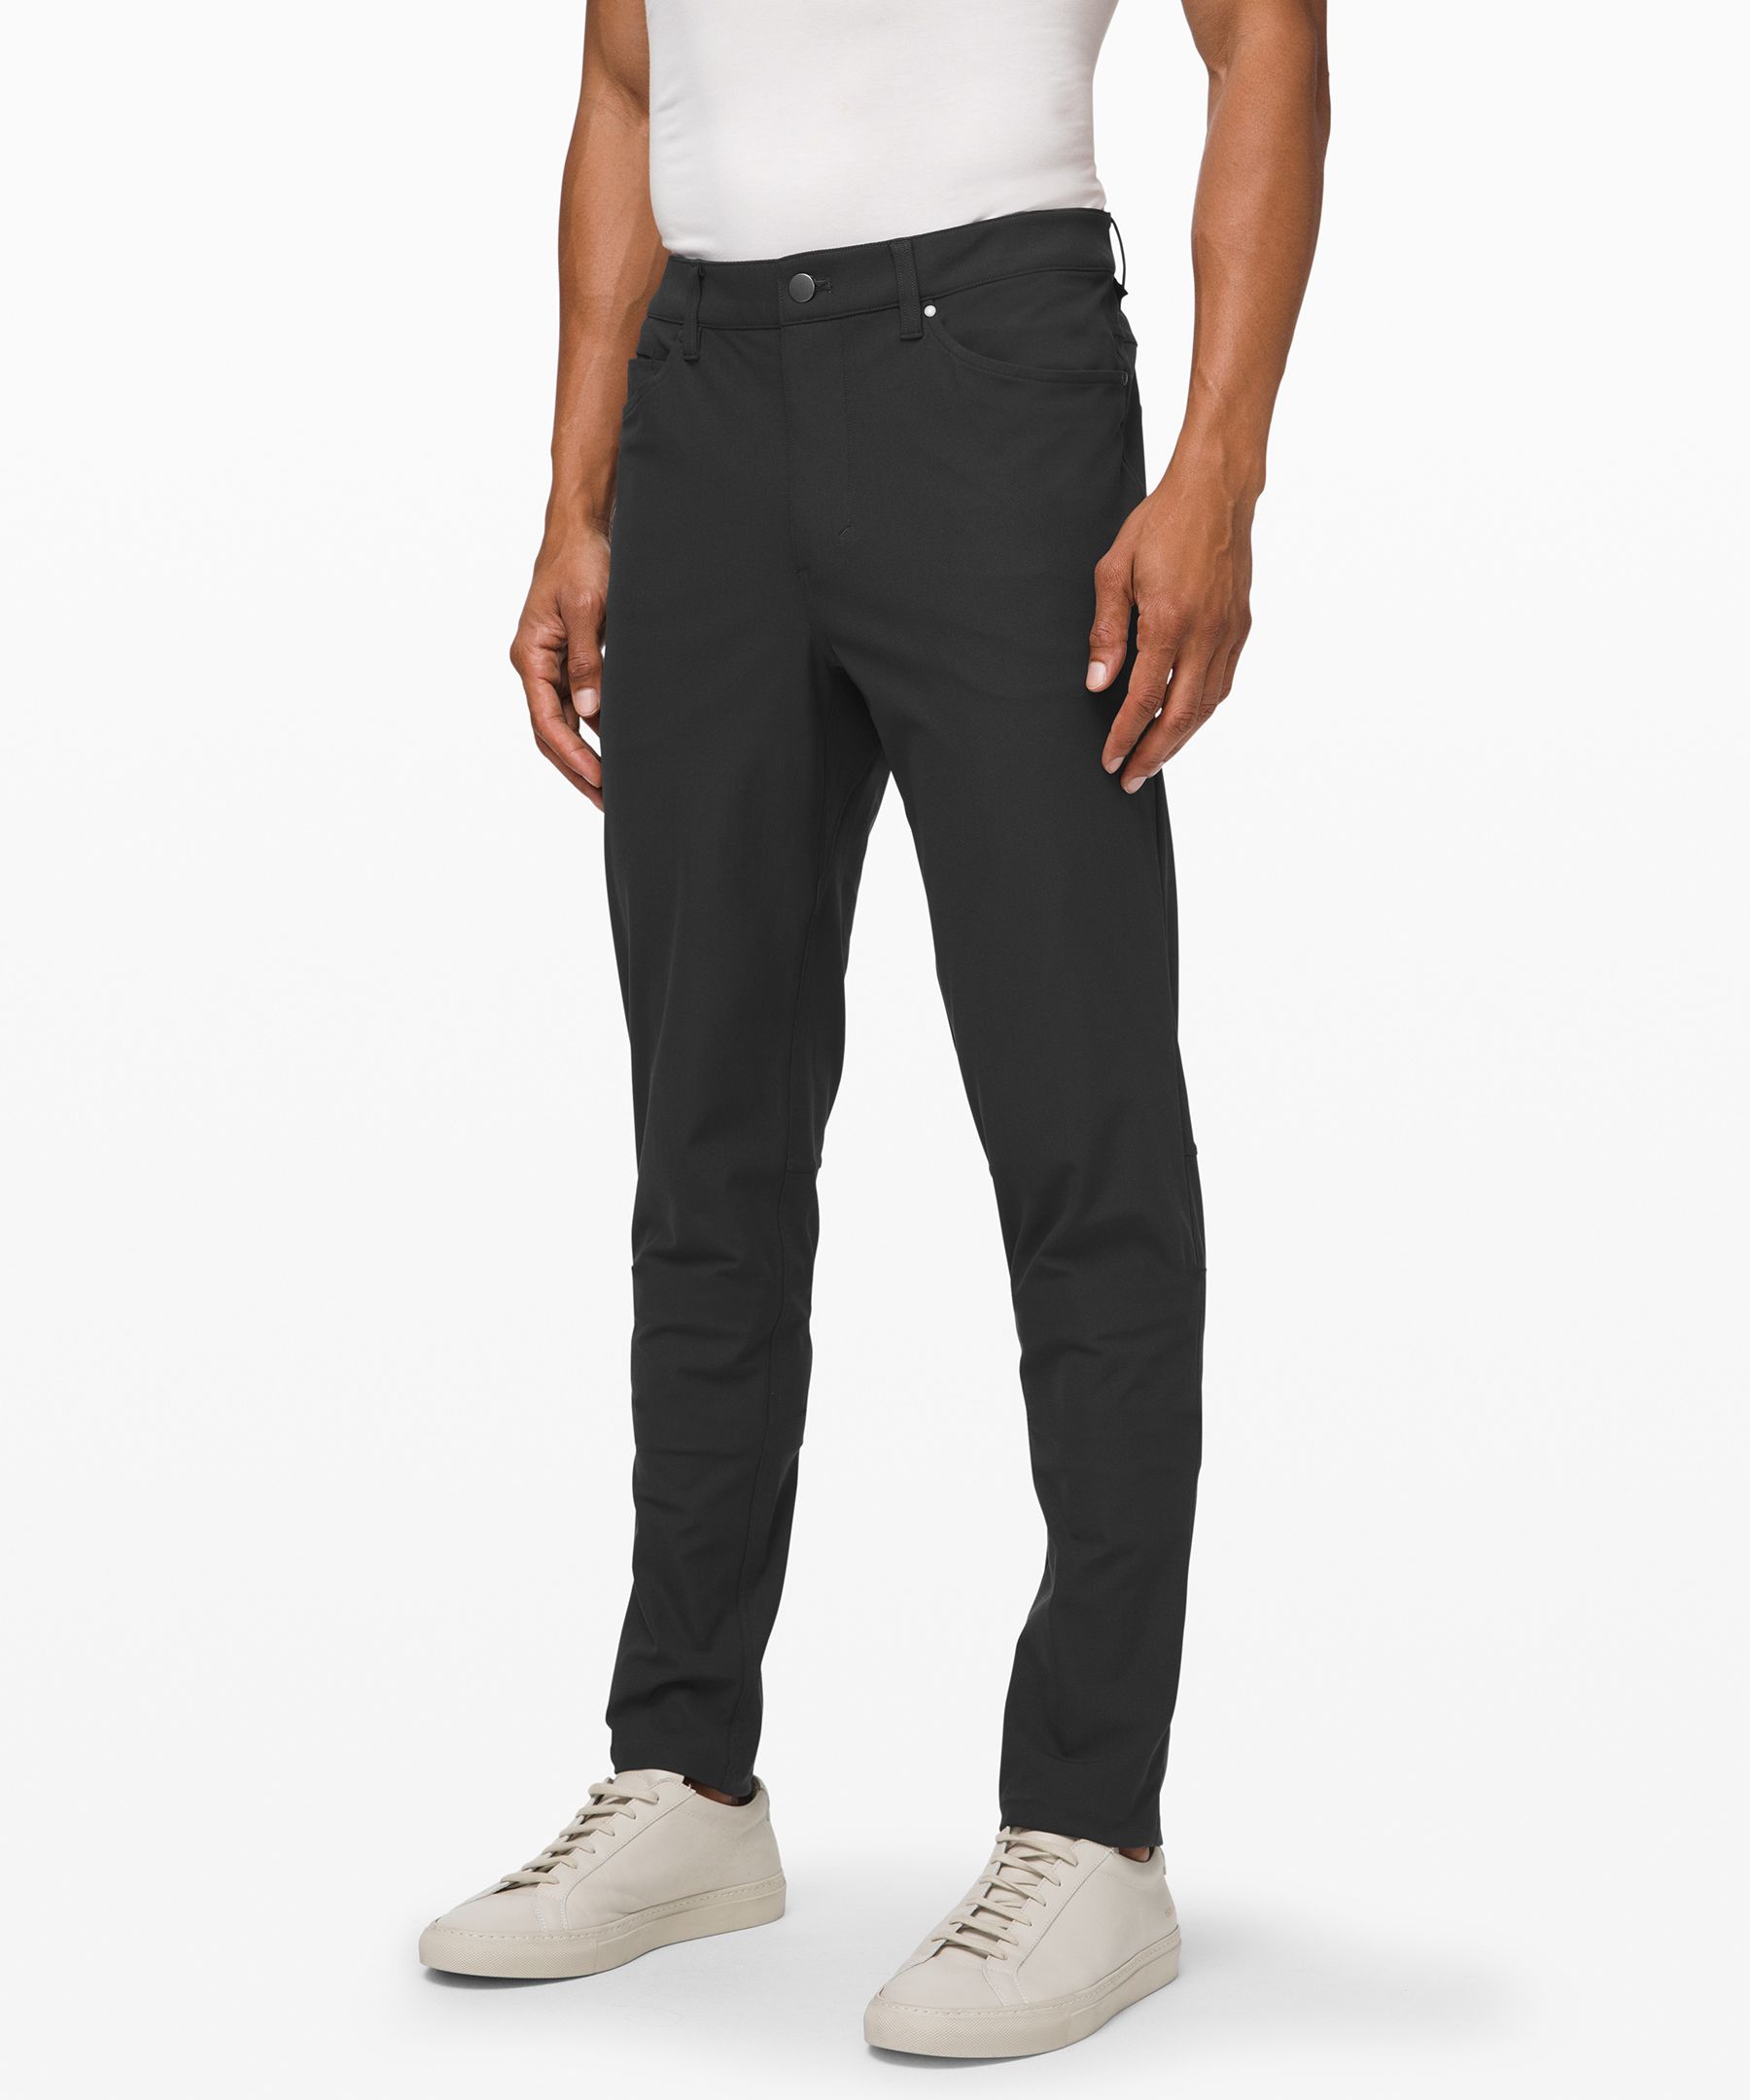 Are my ABC joggers too long/baggy? : r/lululemon